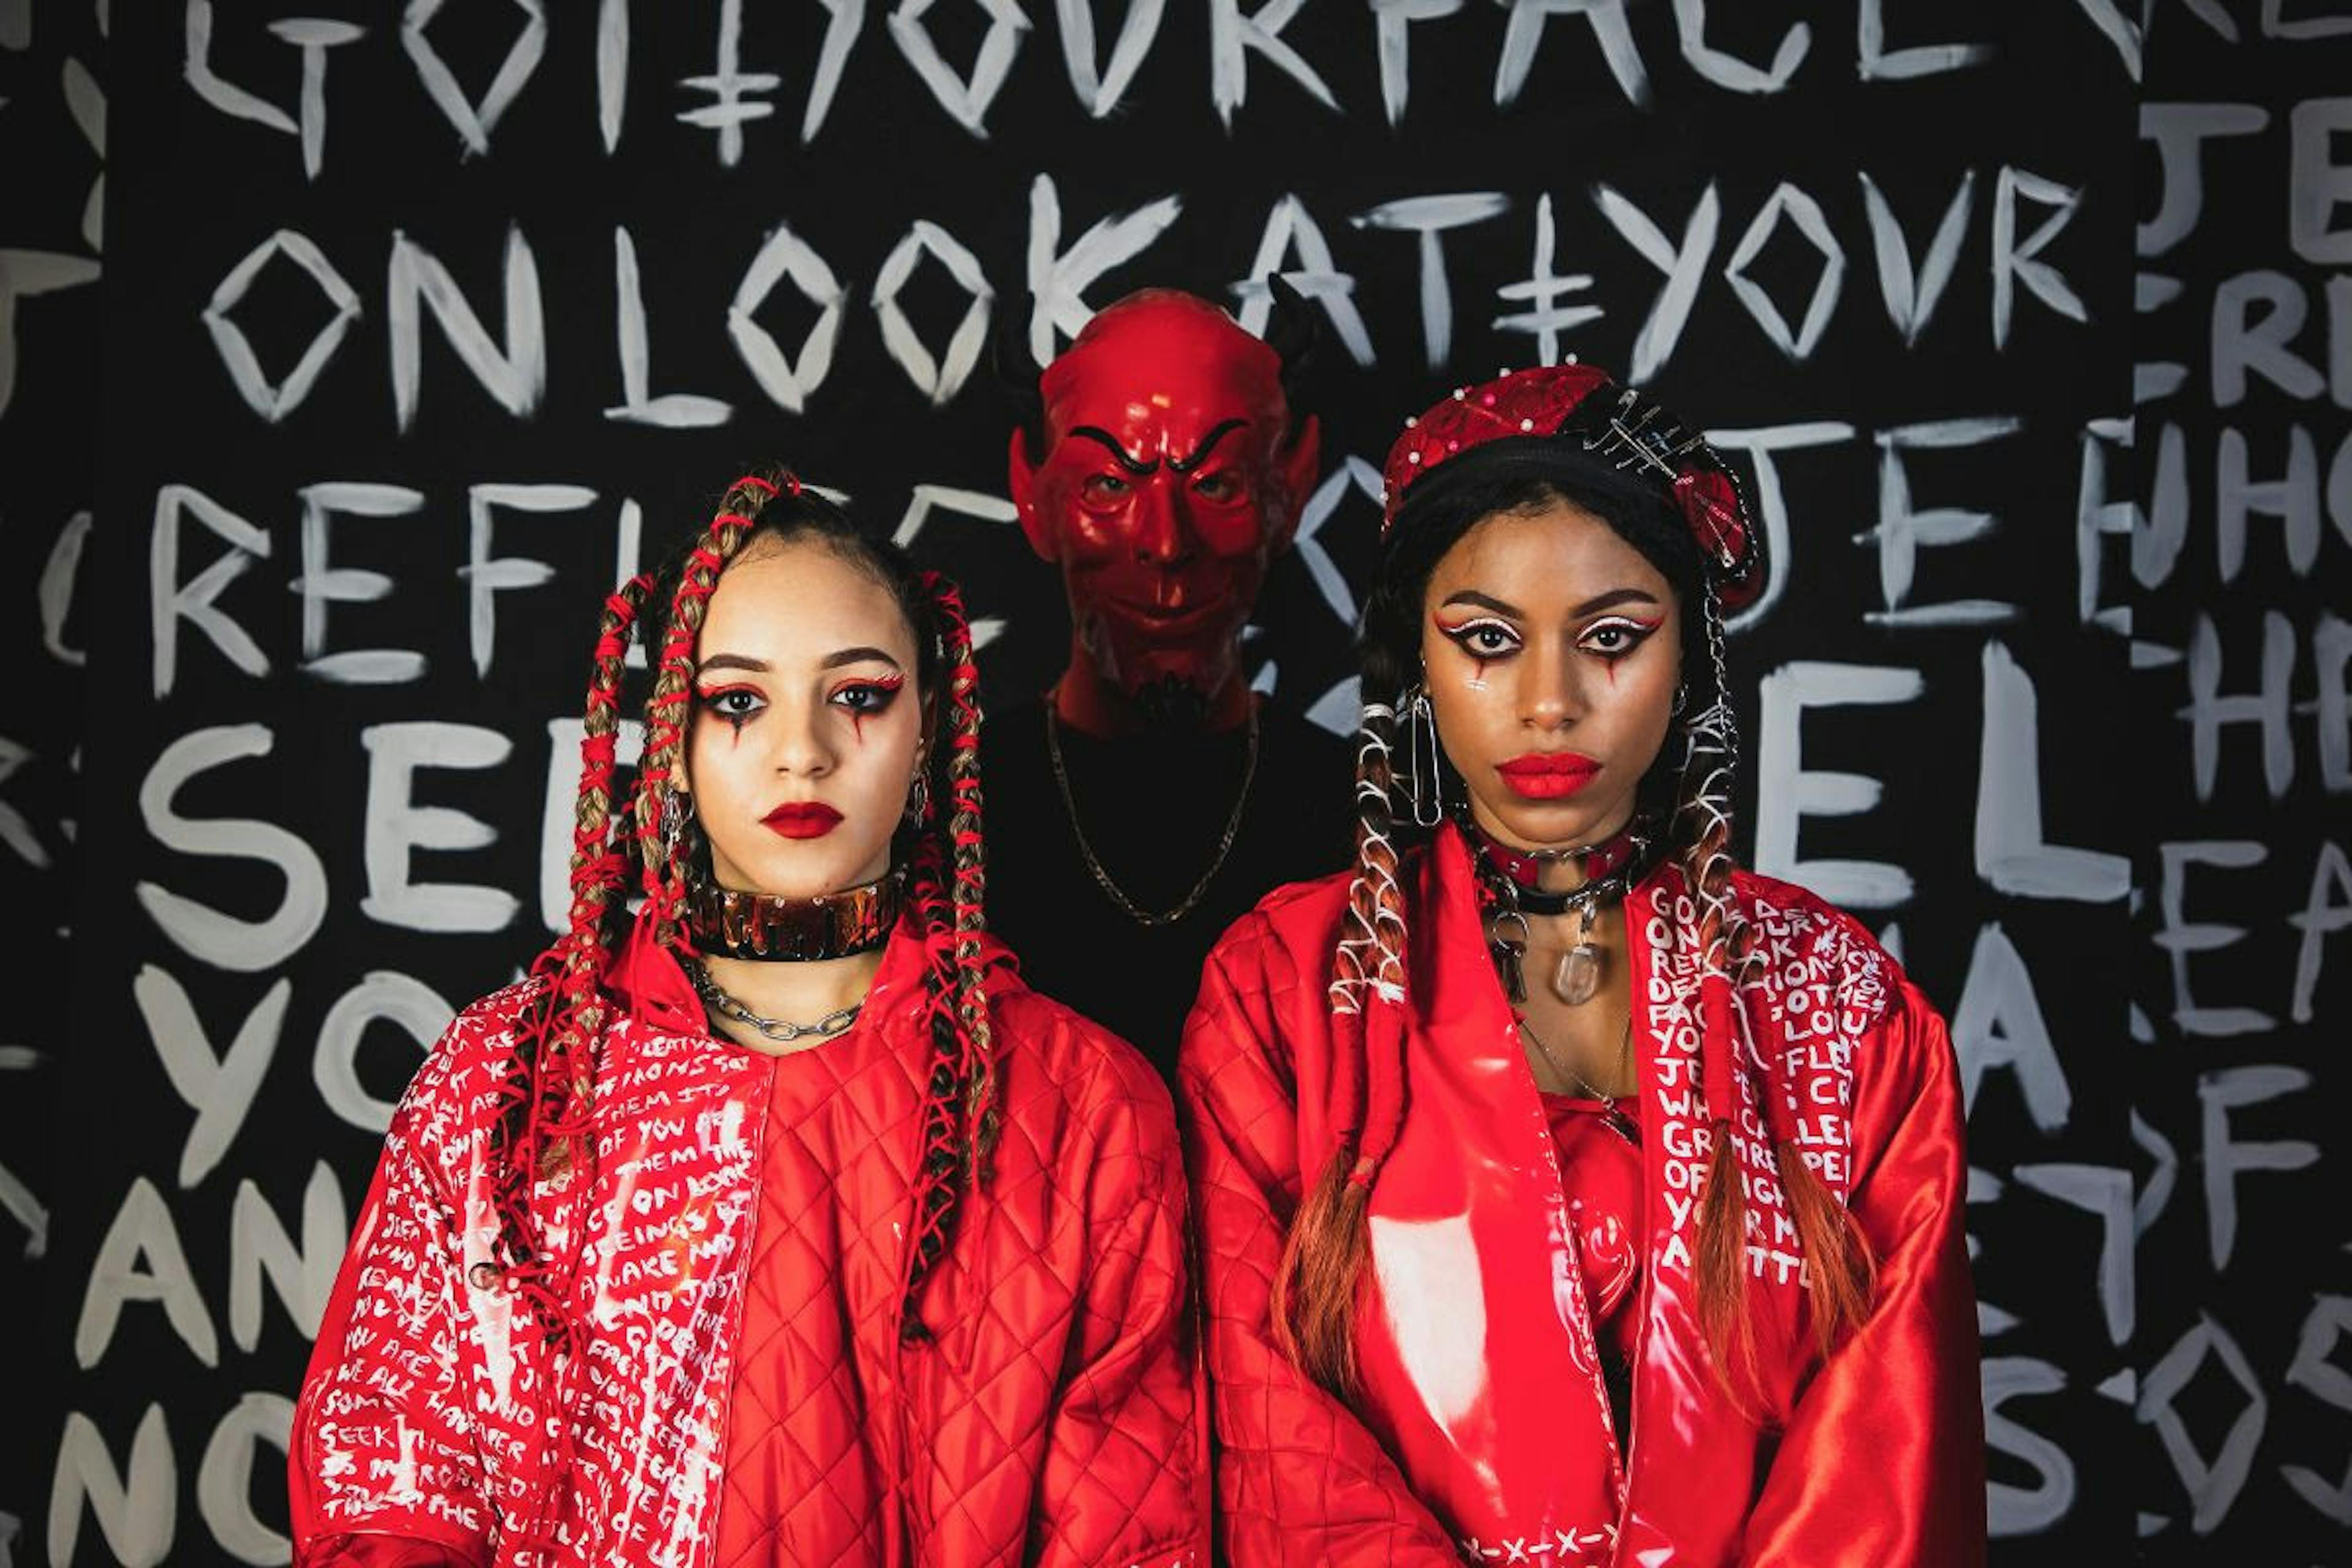 Nova Twins: "It's Difficult For Women Of Colour In Rock Music"